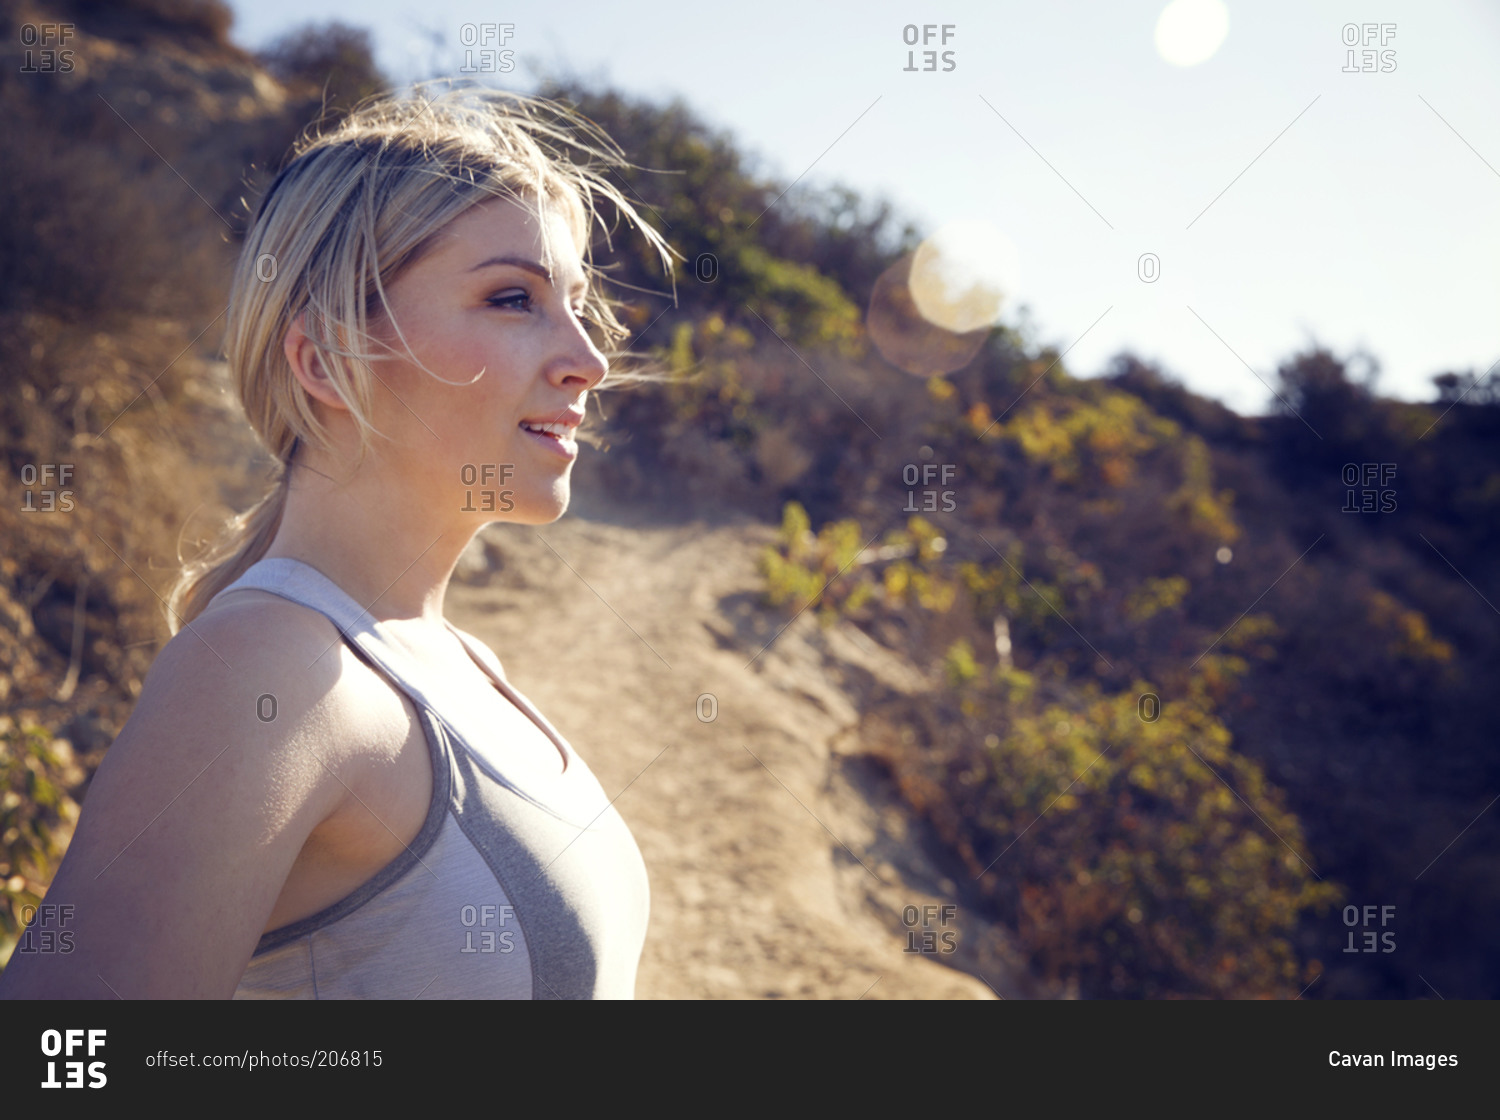 Woman standing confidently during trail workout